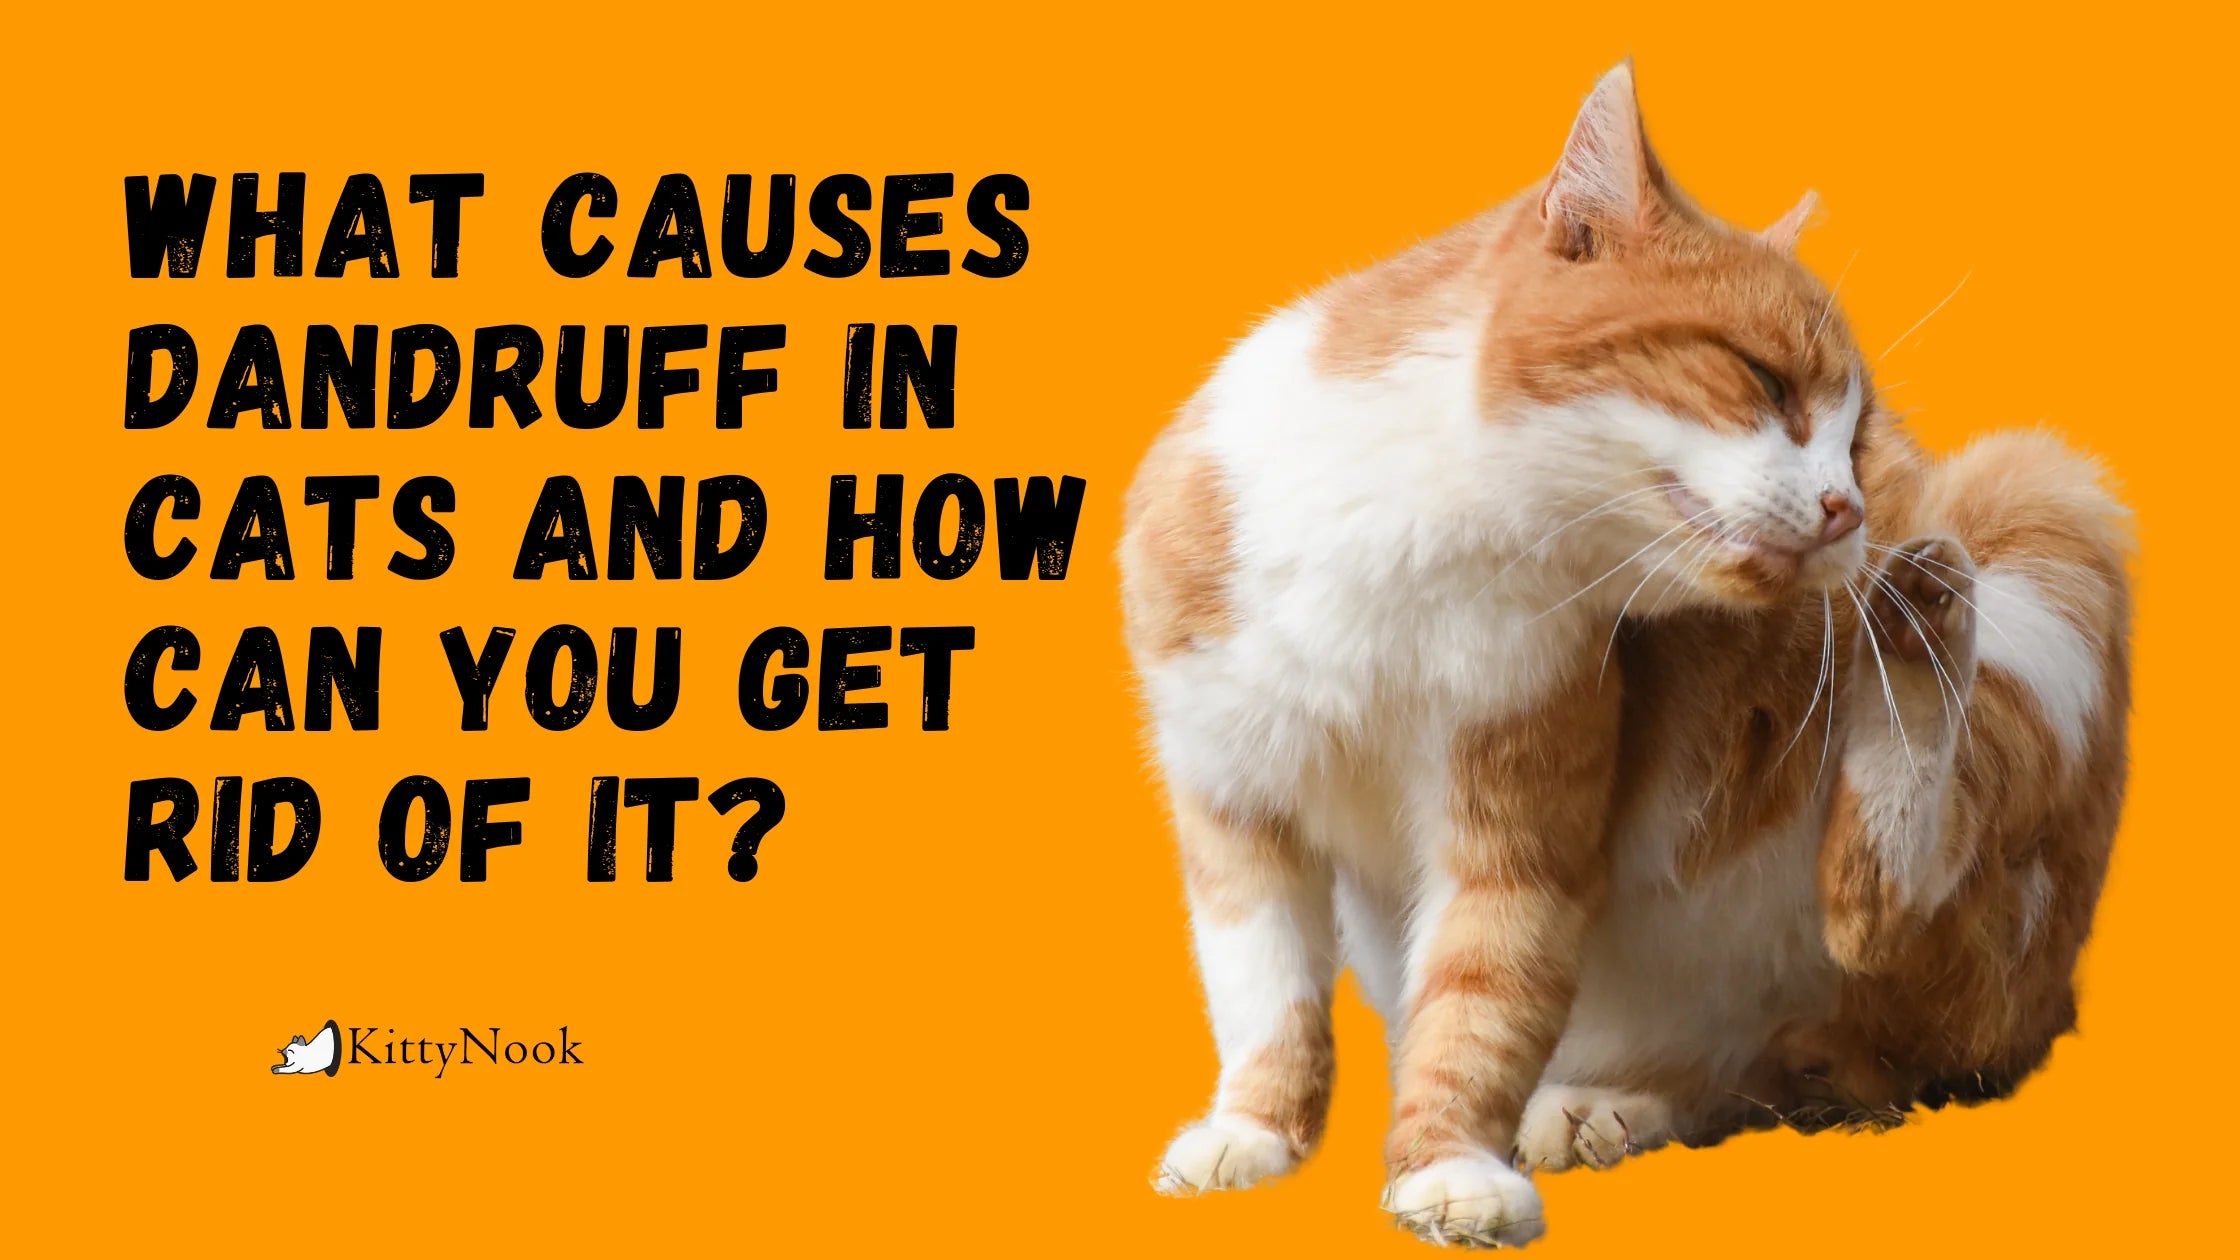 What Causes Dandruff in Cats and How Can You Get Rid Of It? - KittyNook Cat Company